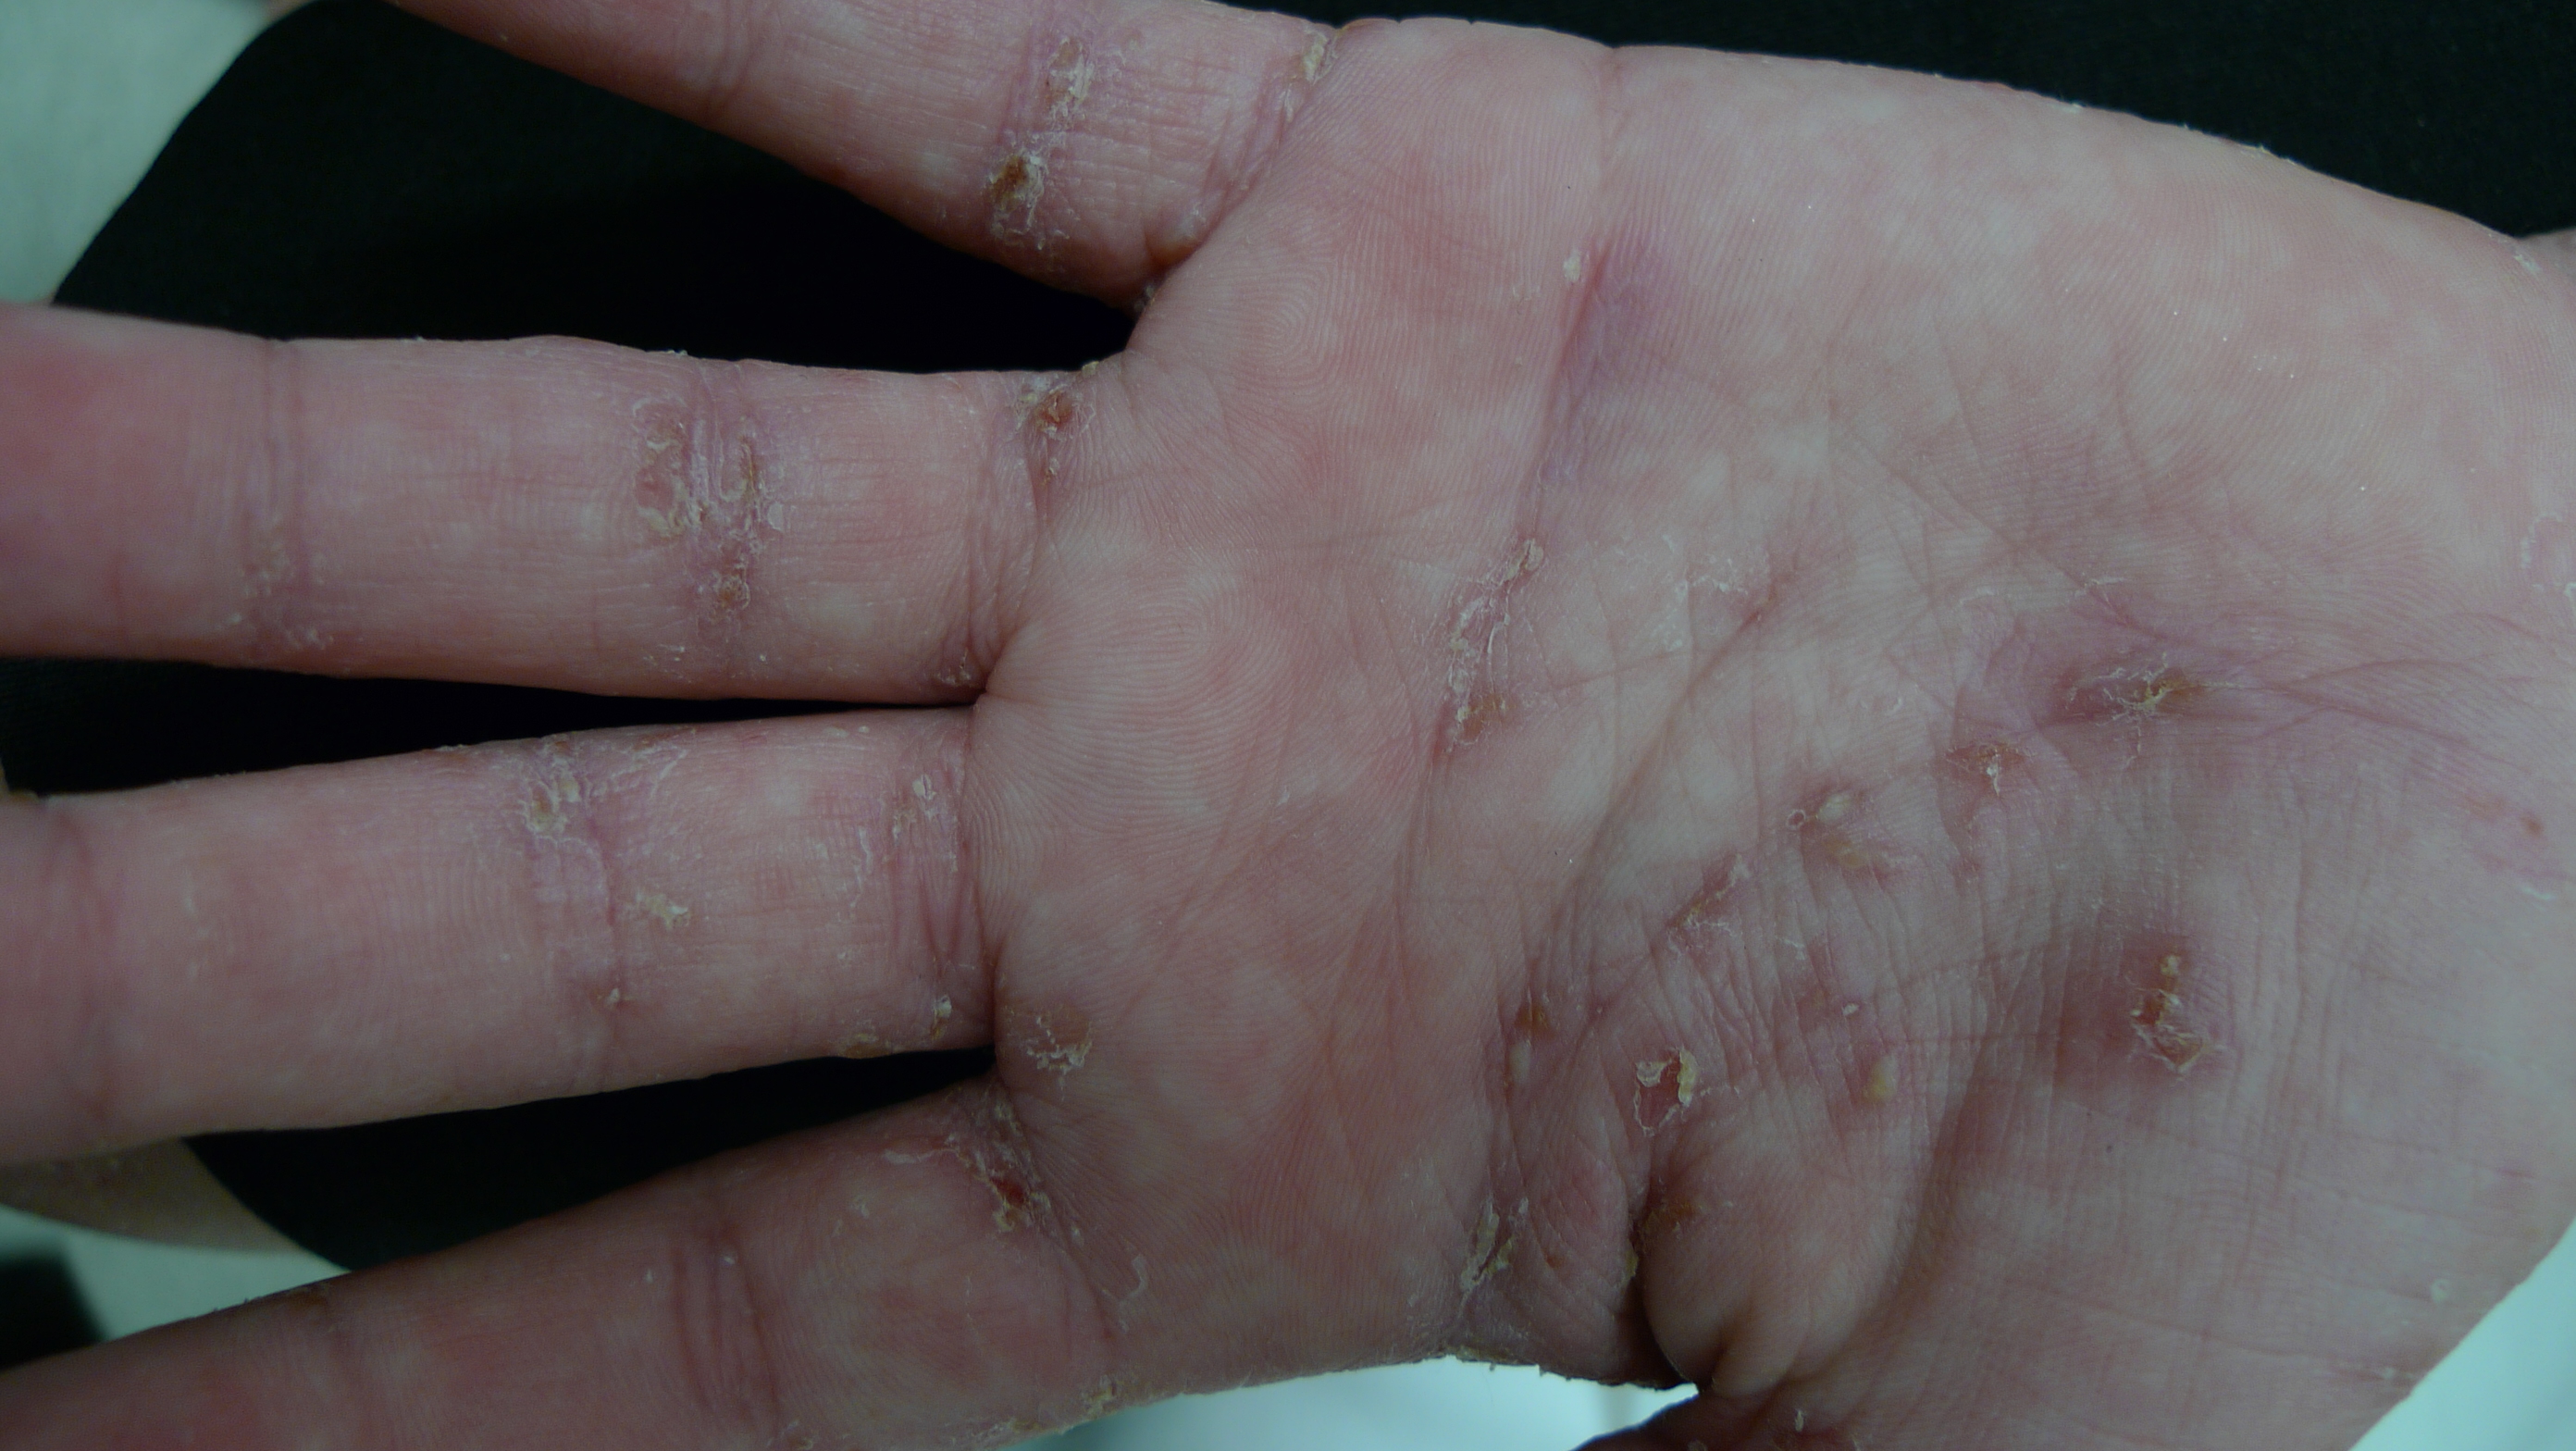 Scabies on the hand - image reproduced with permission of Dr Davin Lim